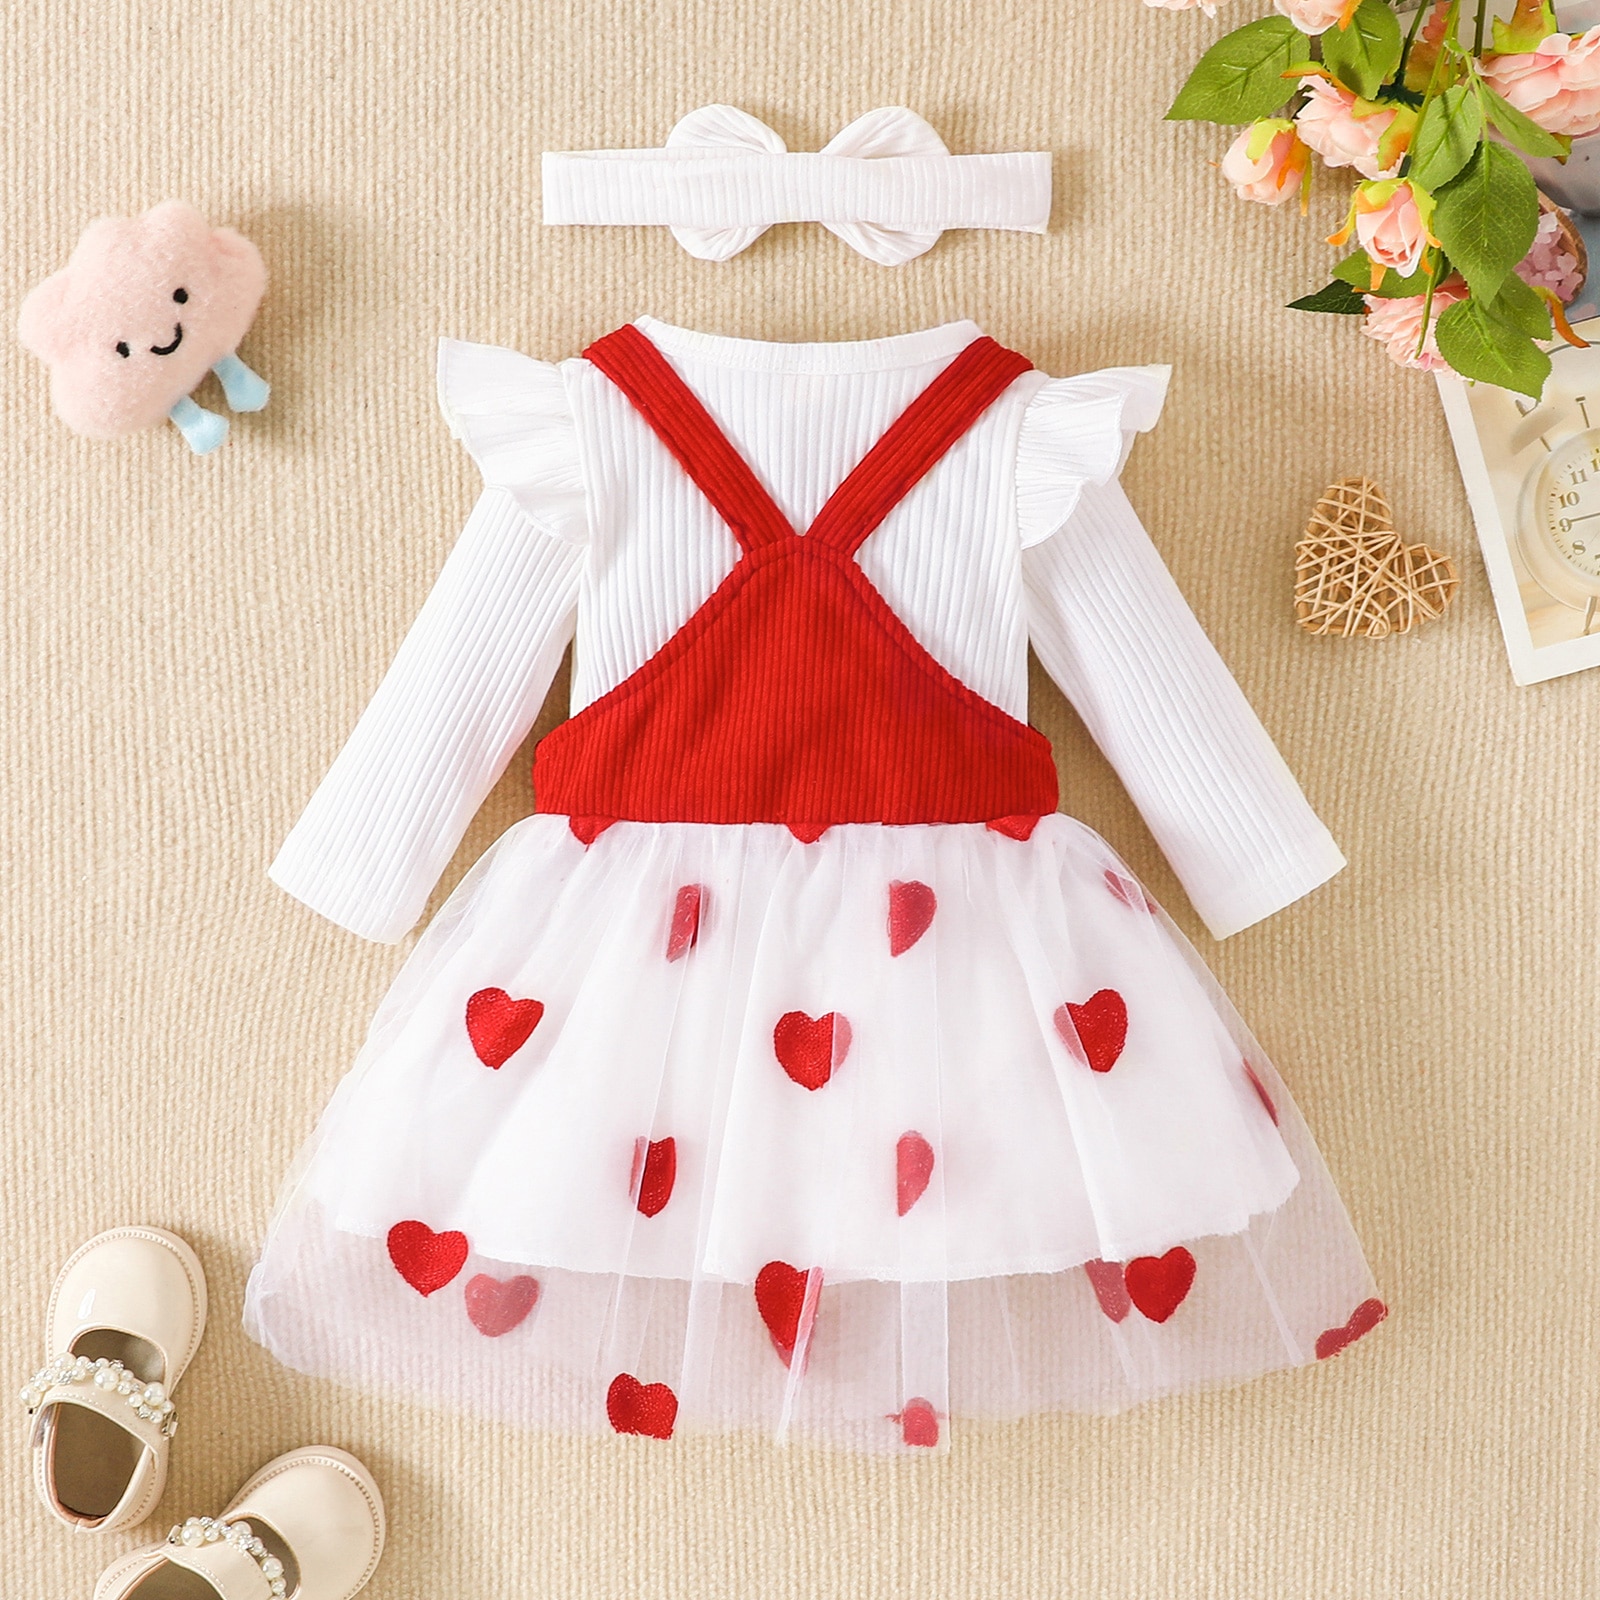 Citgeett-Spring-Valentine-s-Day-Infant-Baby-Girls-Jumpsuits-Set-Long-Sleeves-Romper-and-Heart-Print-2